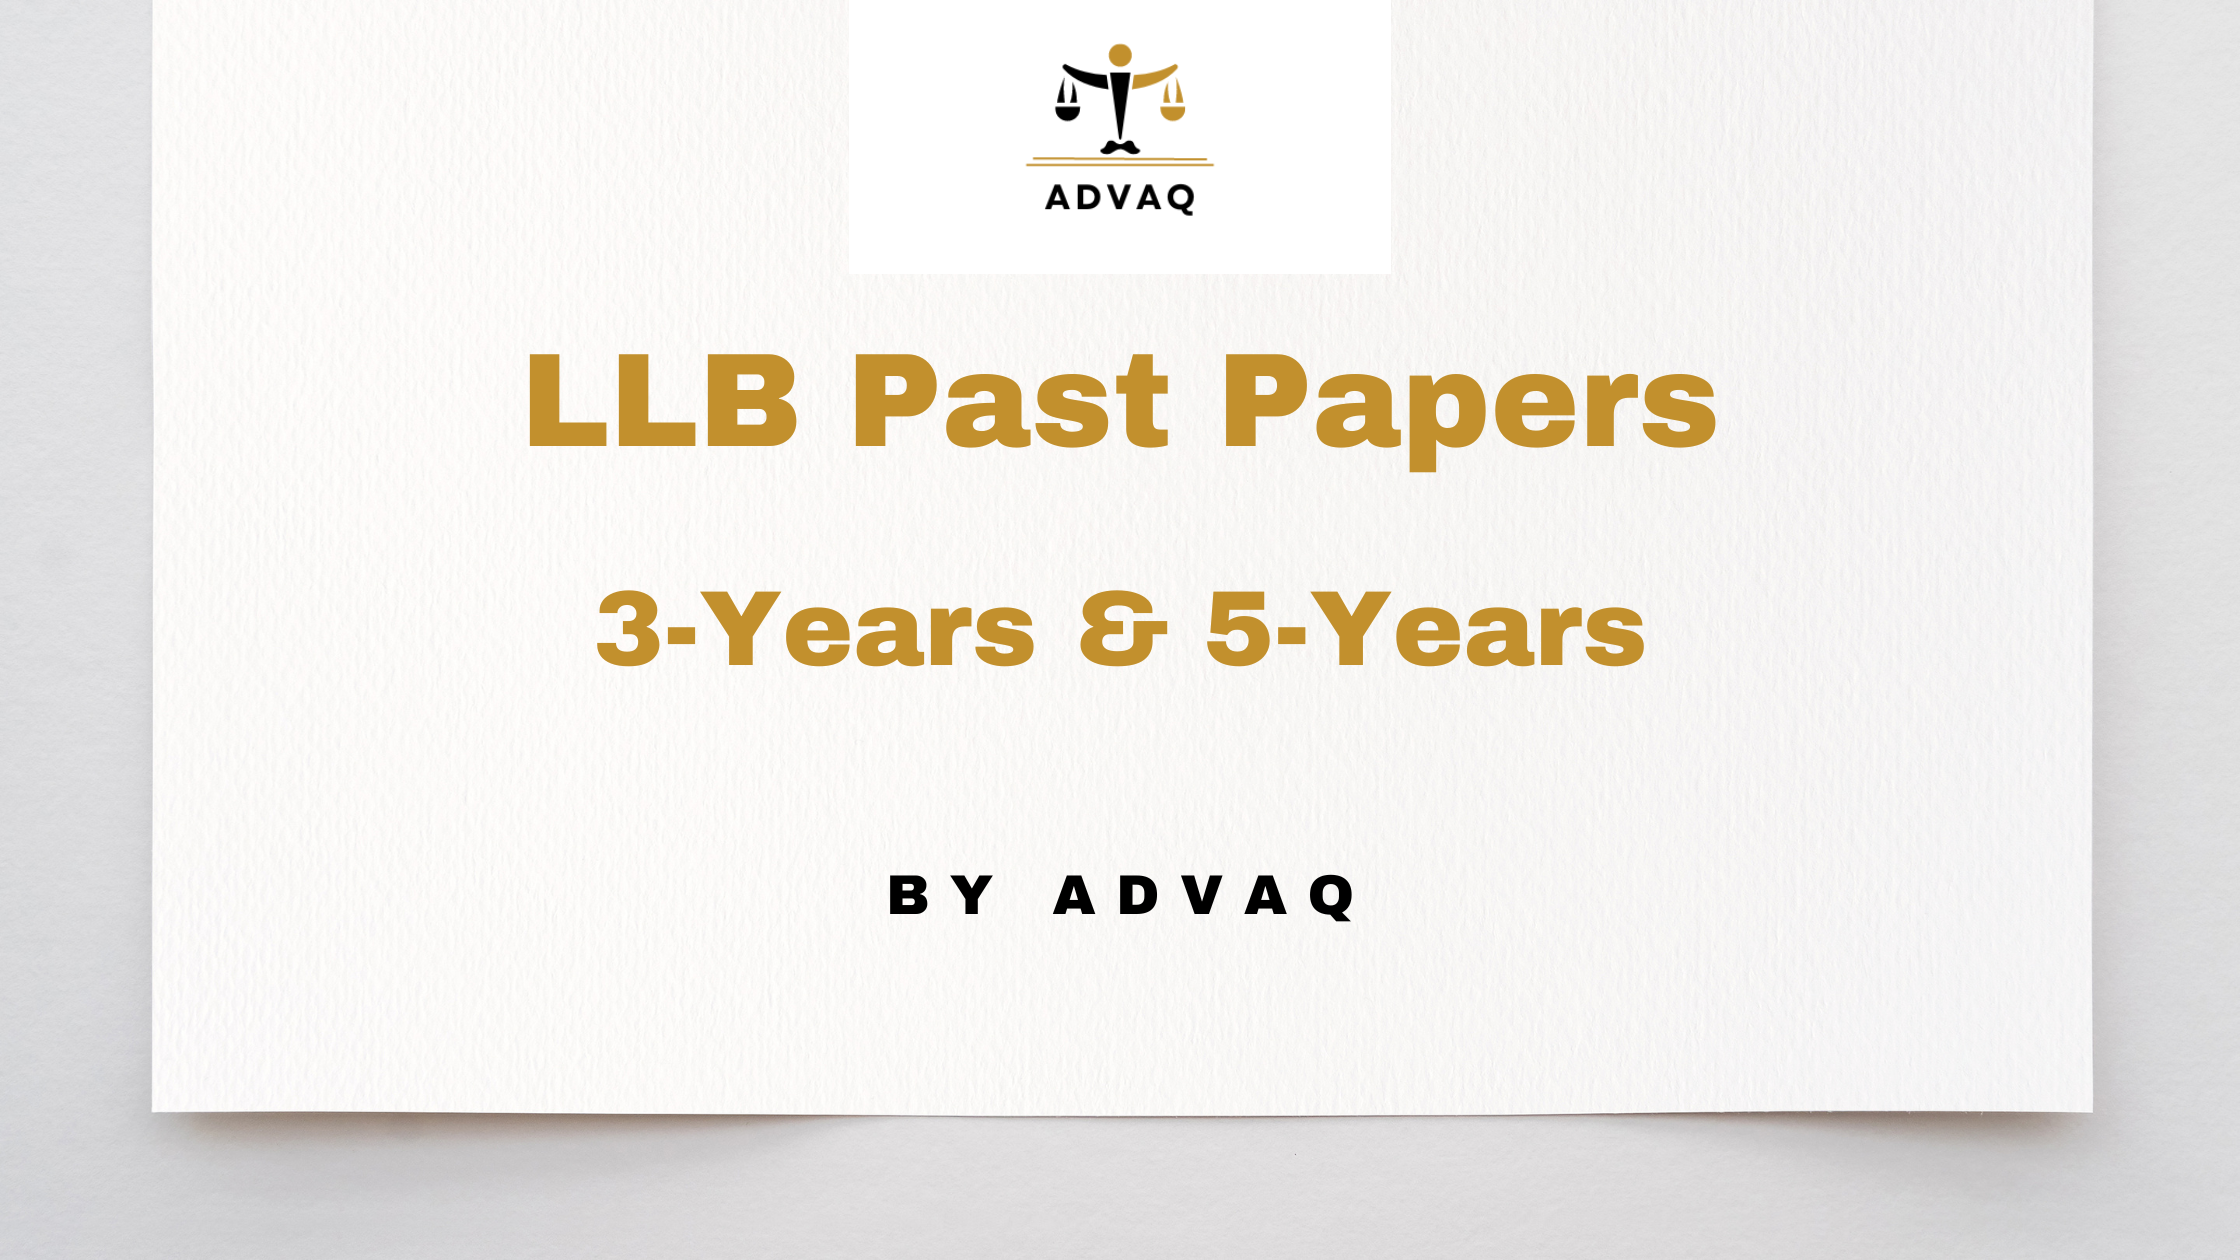 LLB Past Papers